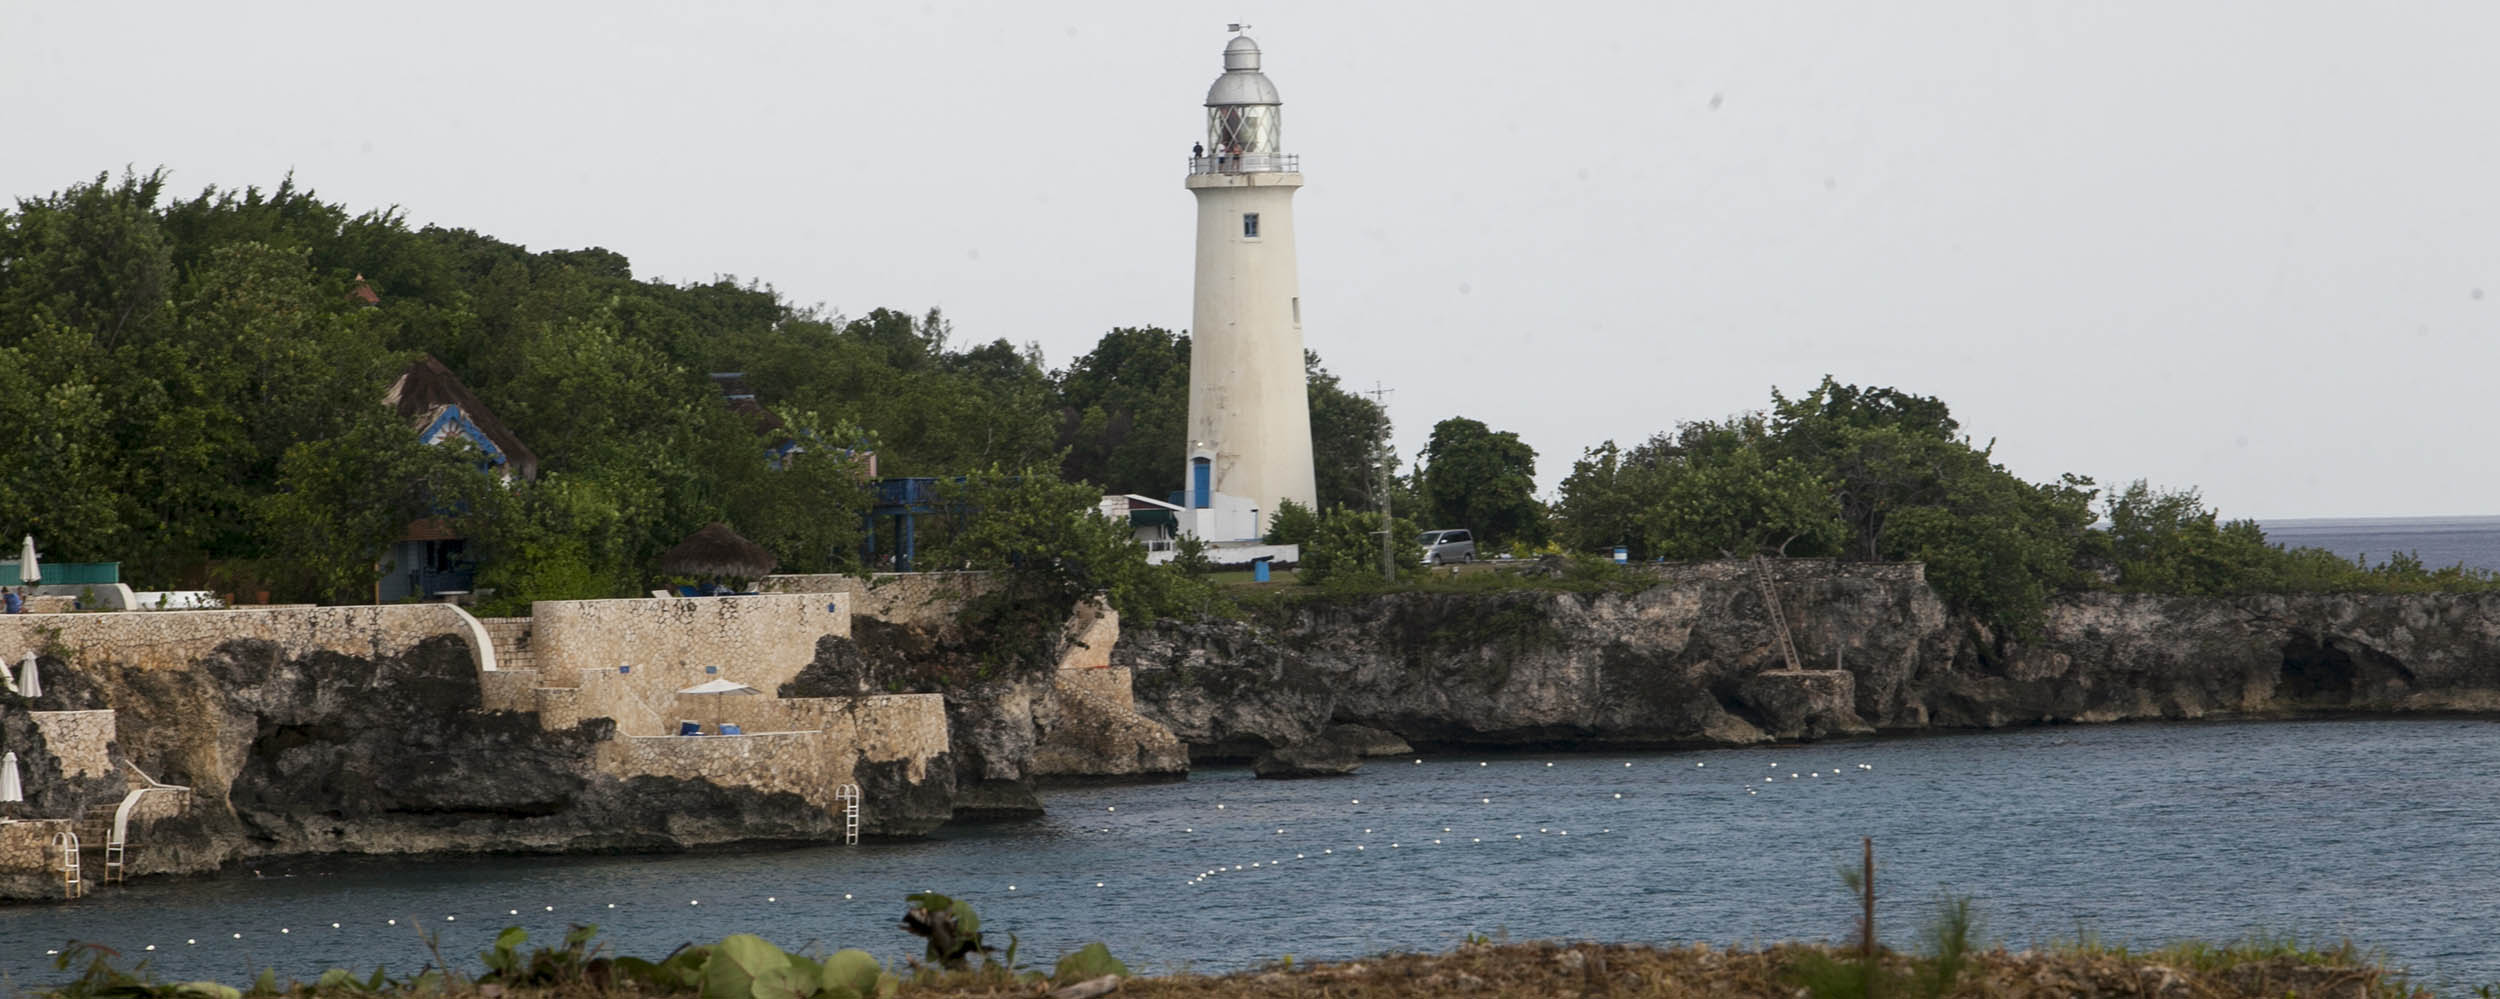 Negril Lighthouse - West End, Negril Jamaica